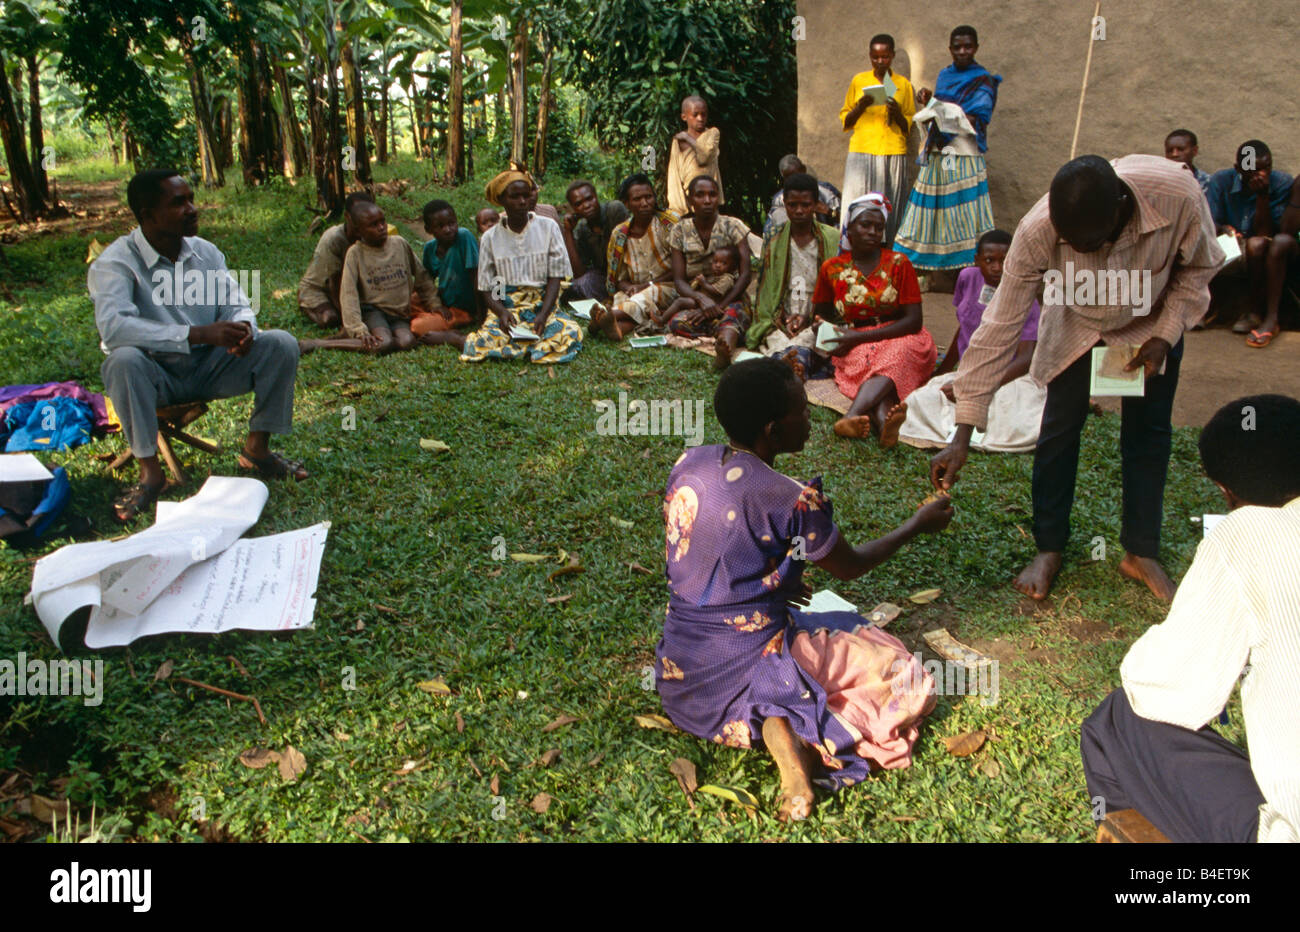 Villagers gathered at community empowerment project in village, Uganda Stock Photo